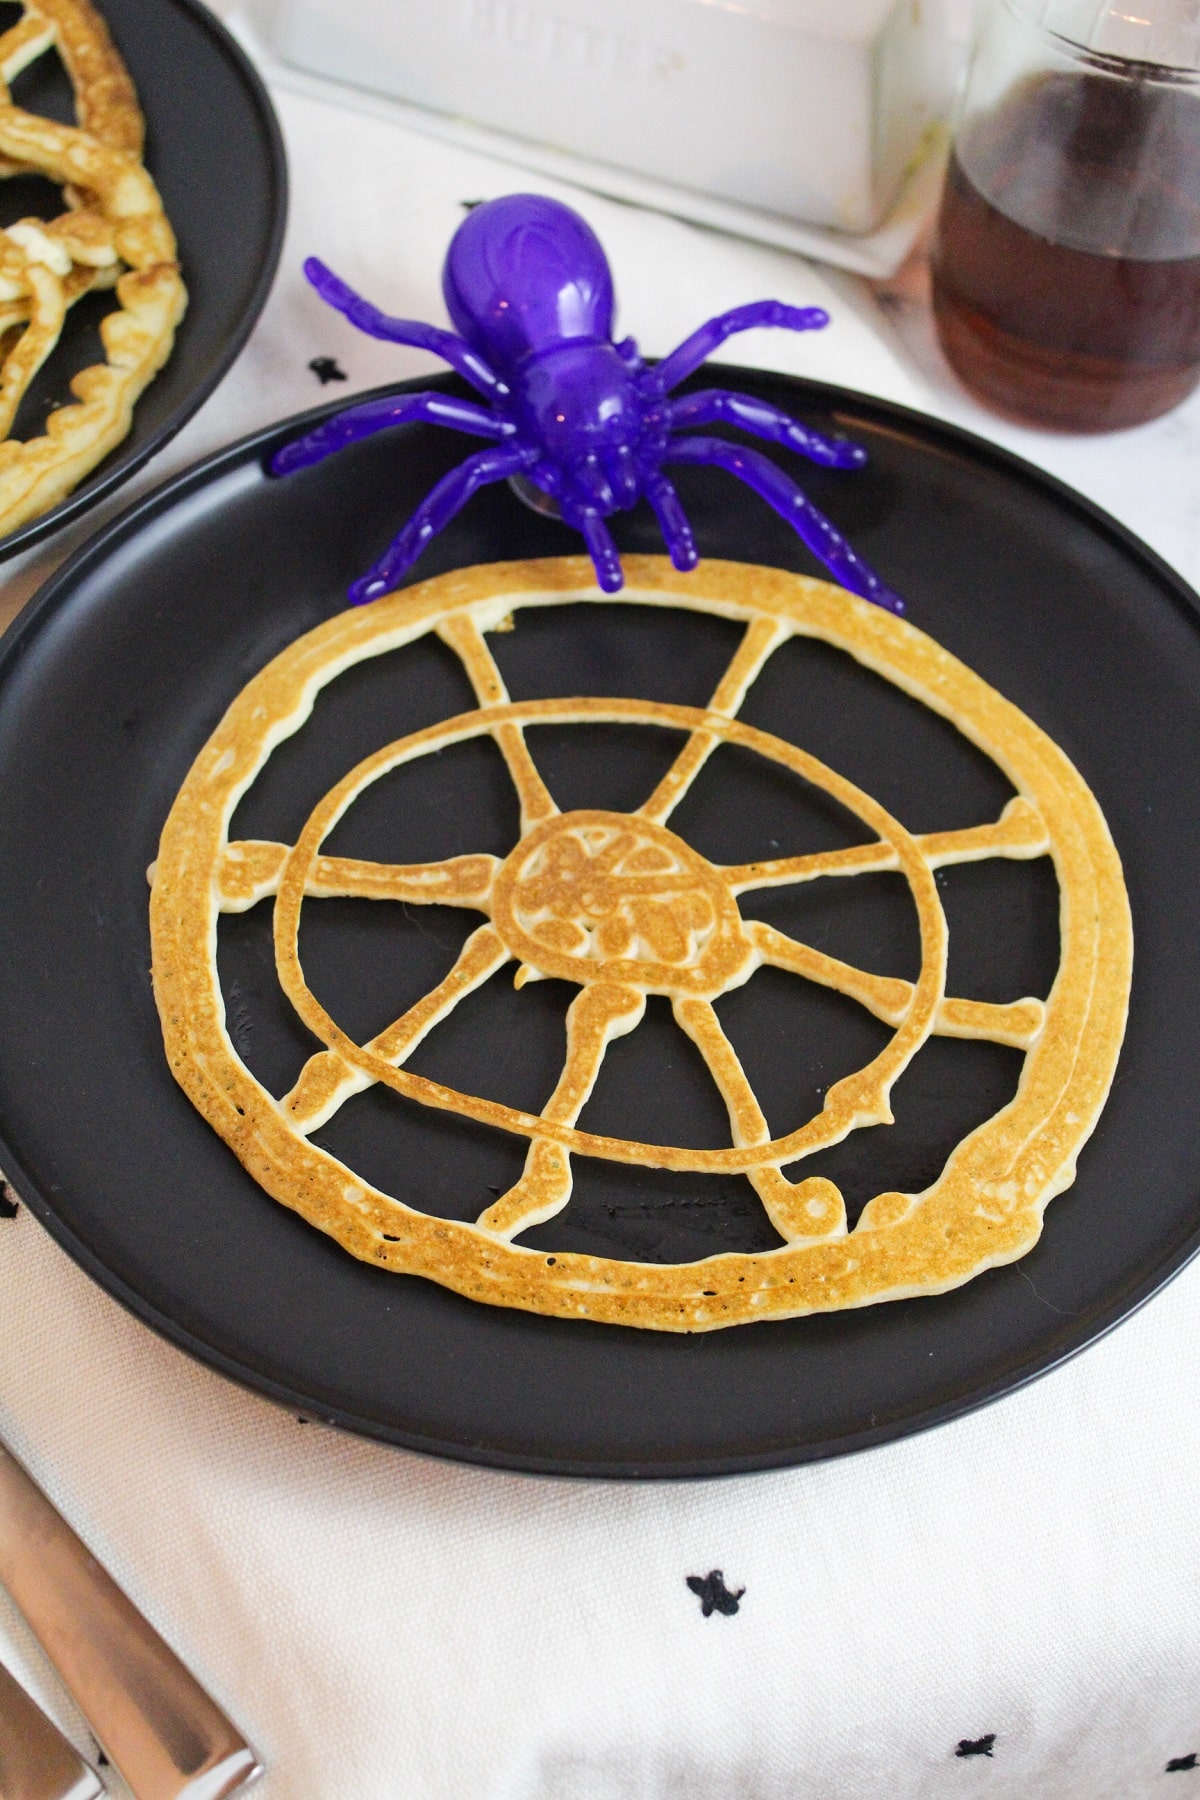 pancakes shaped like a round spider web with a plastic purple spider on the side.